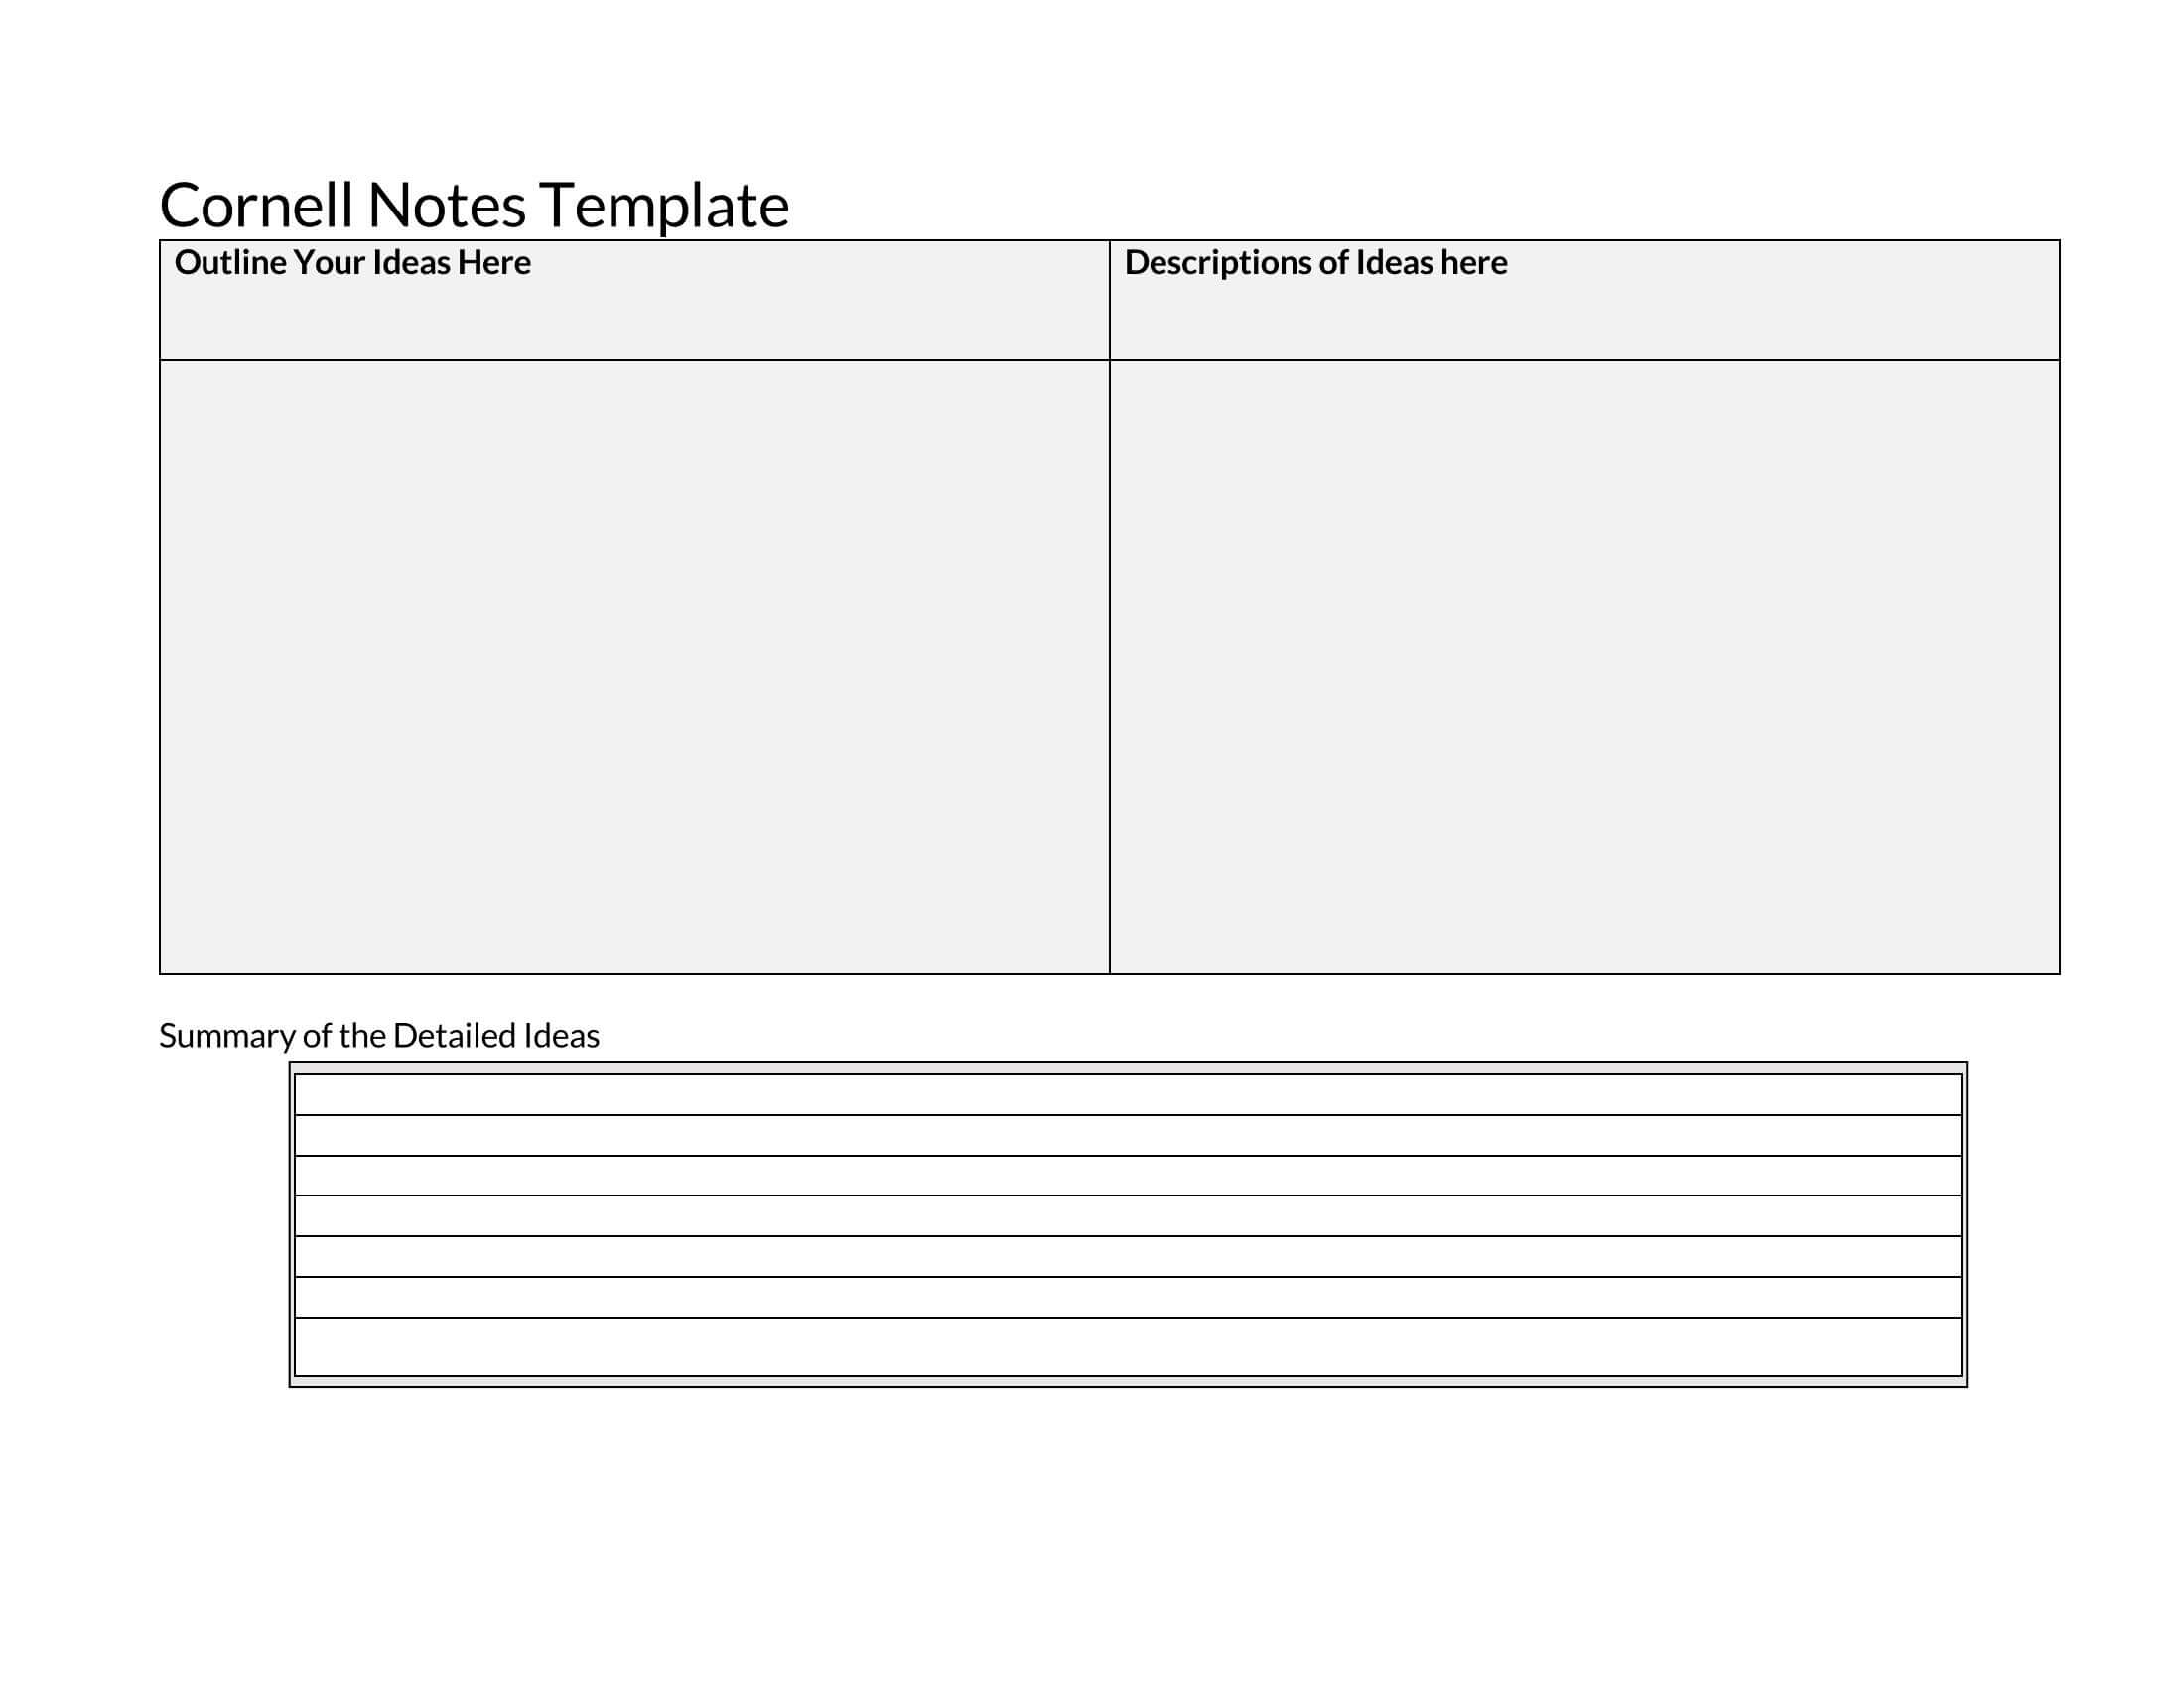 Excel Cornell Note Format Sample